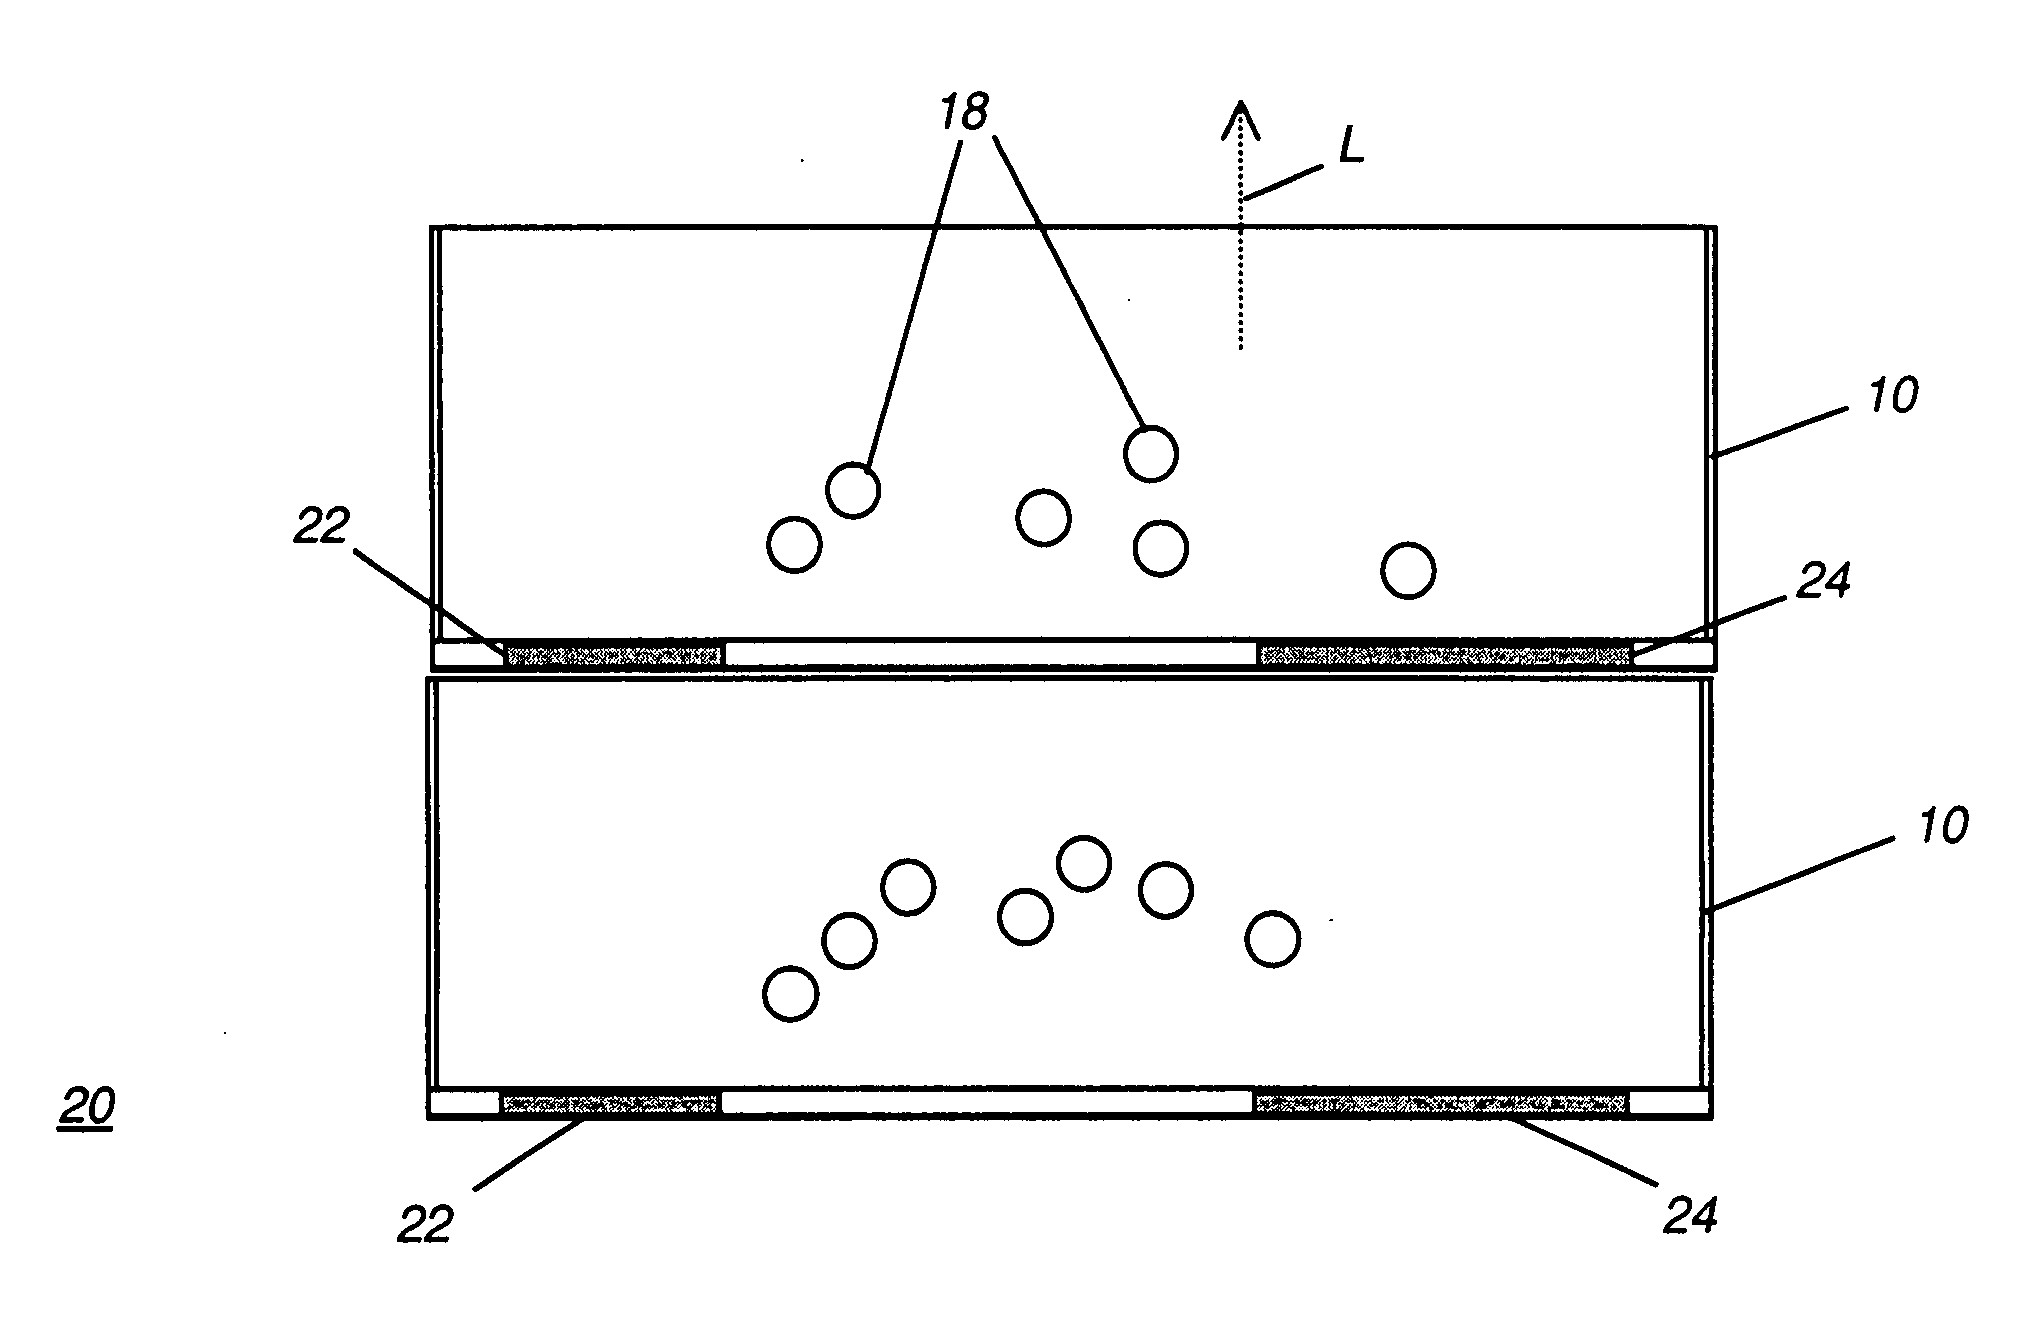 Stacked-cell display with field isolation layer